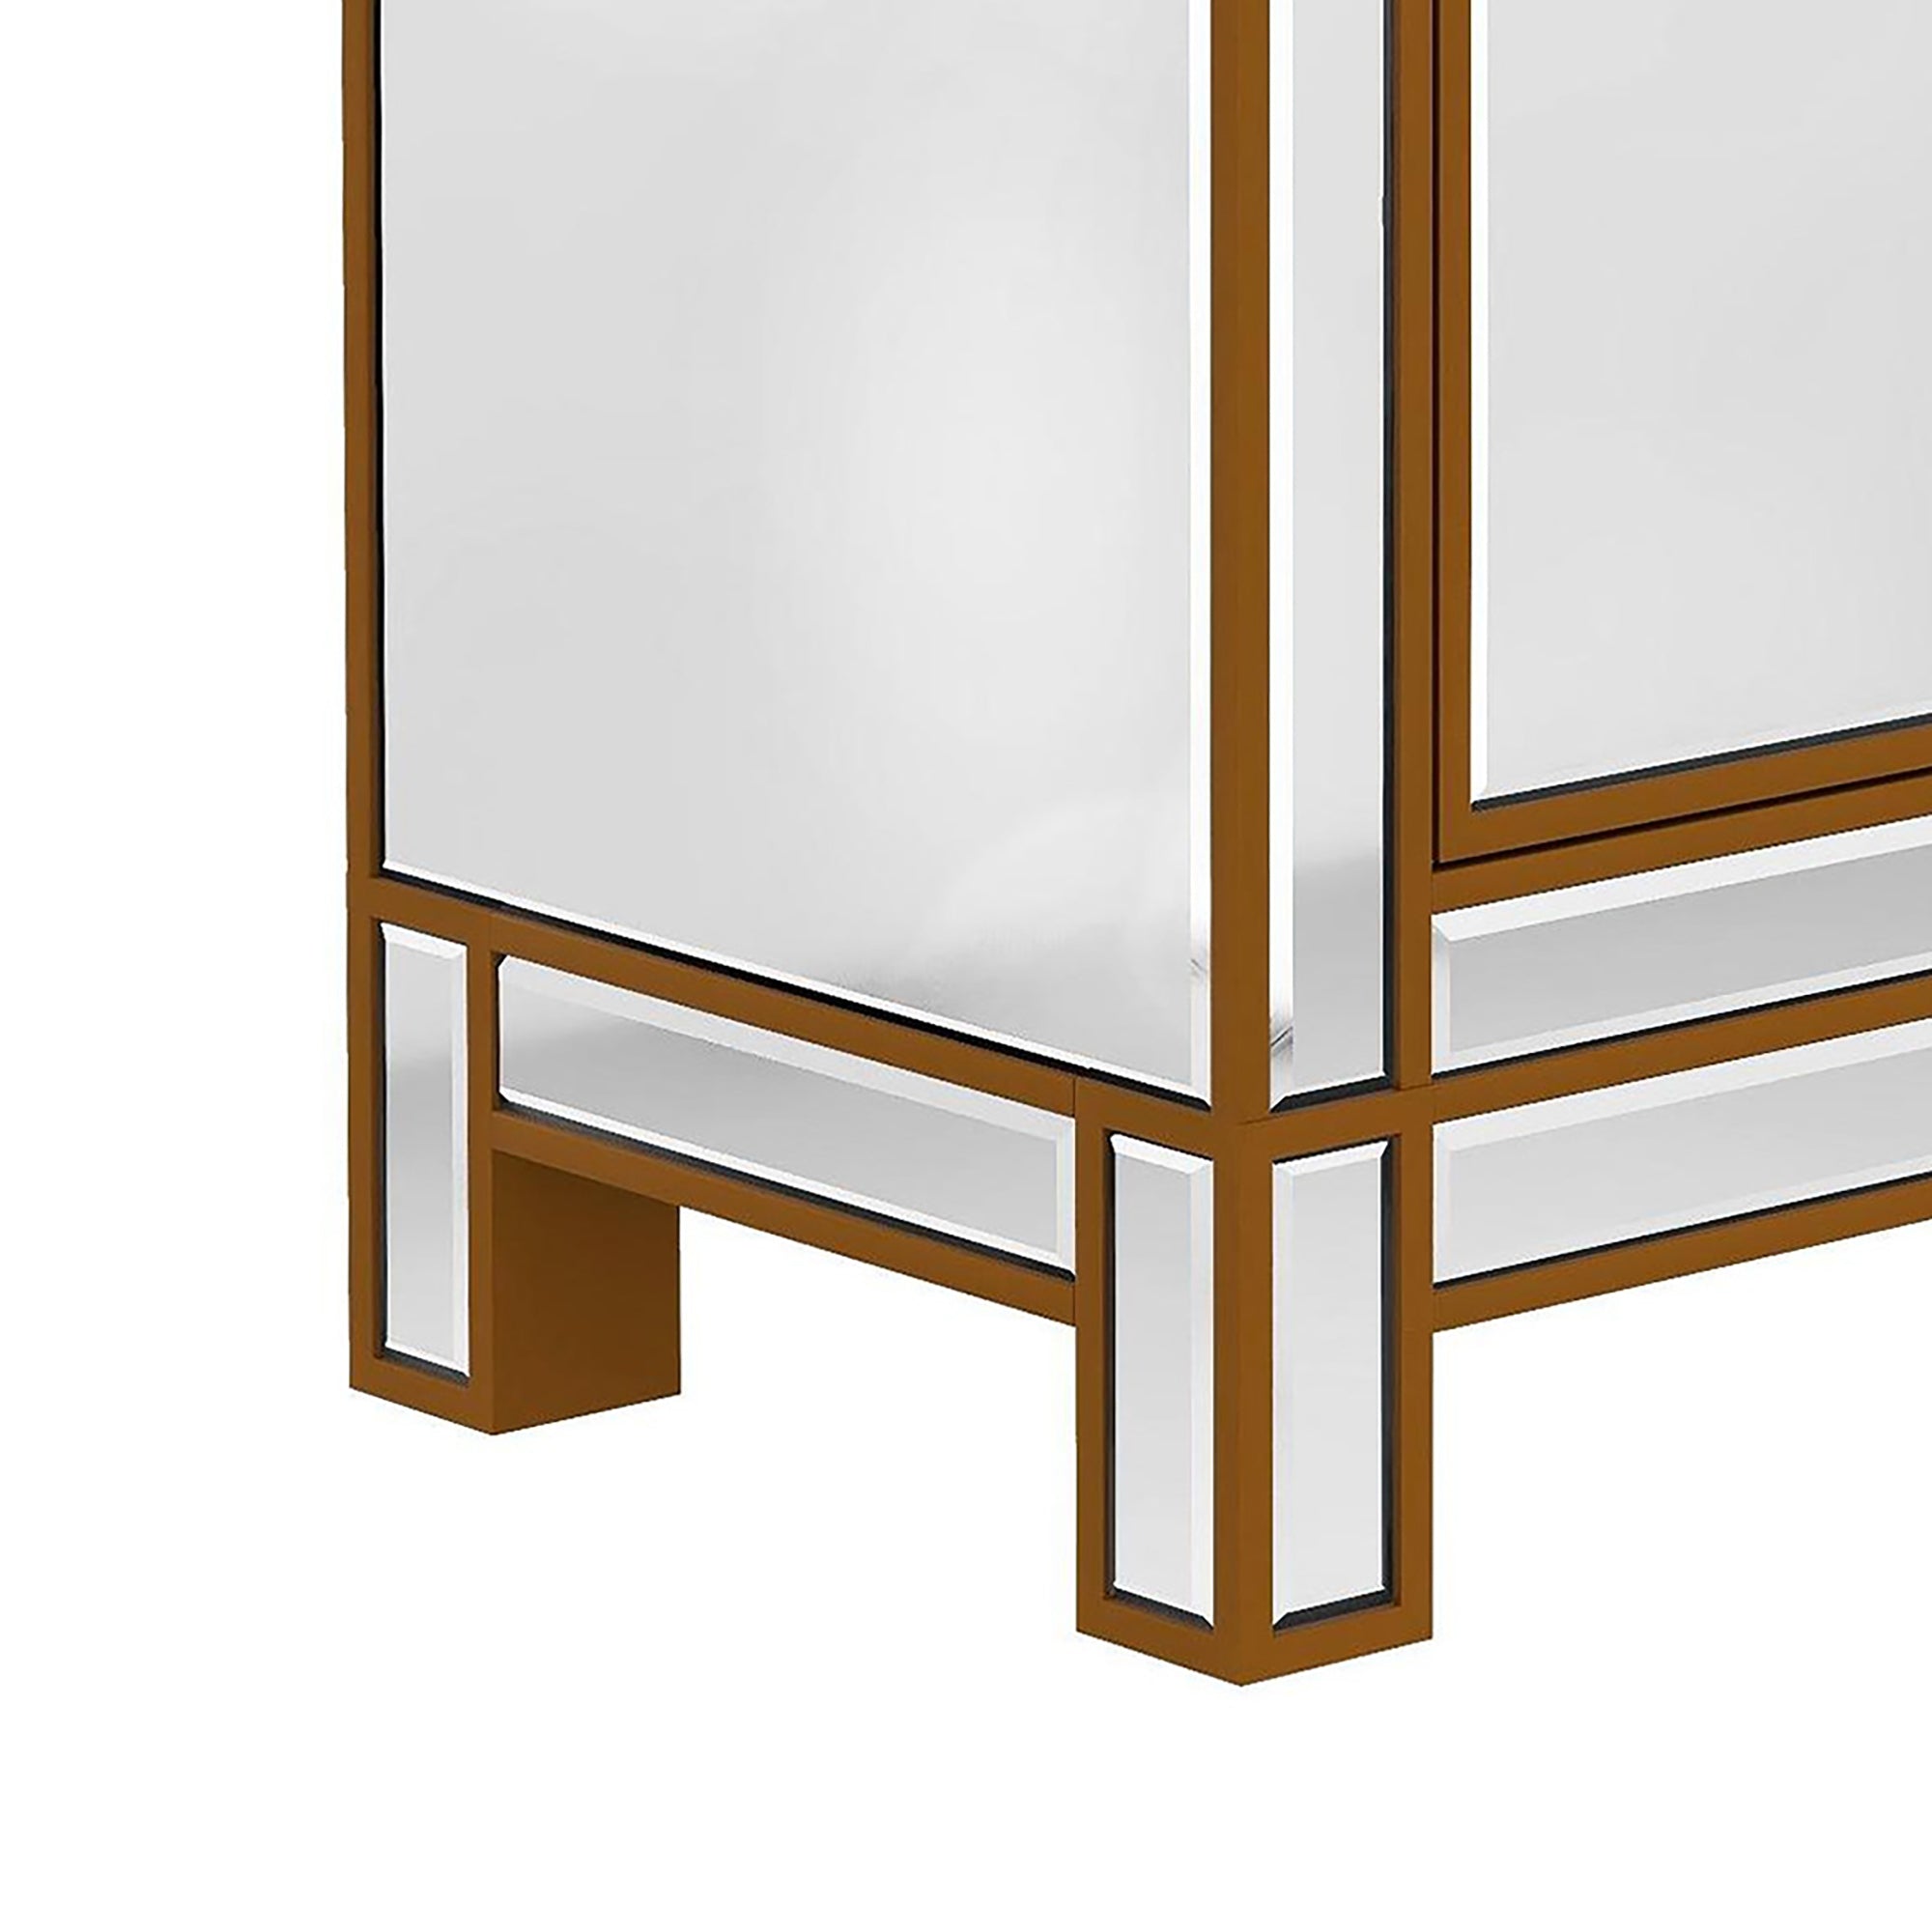 Modern Mirrored Nightstand with 2 Storage Cabinets - Silver Glass